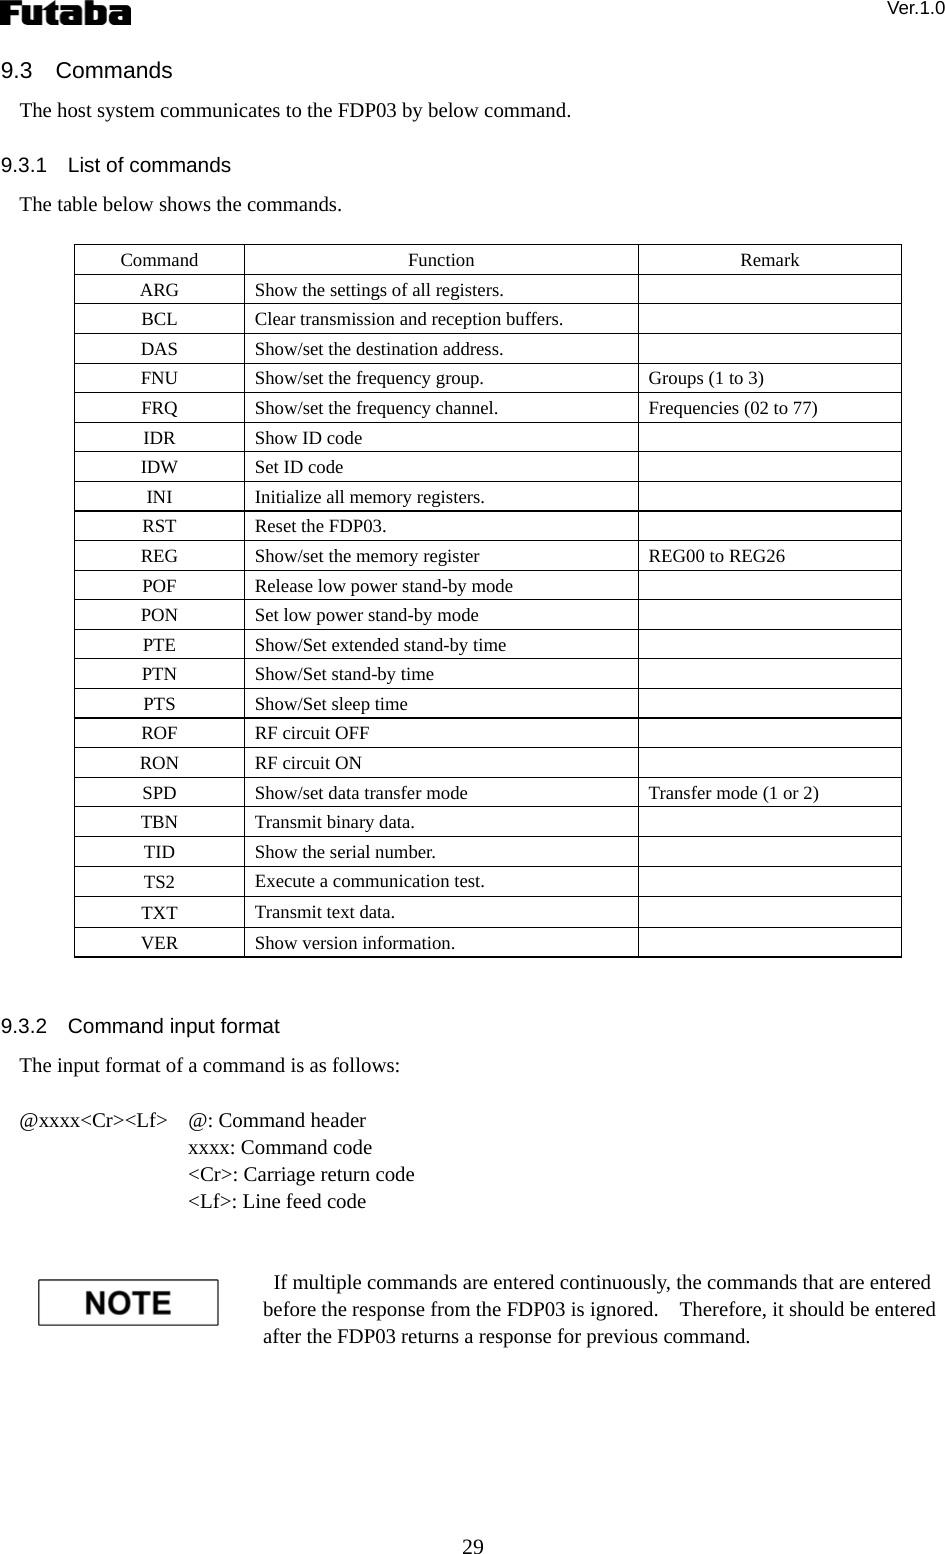 Ver.1.0 29 9.3  Commands The host system communicates to the FDP03 by below command.      9.3.1  List of commands The table below shows the commands.  Command  Function  Remark ARG  Show the settings of all registers.   BCL  Clear transmission and reception buffers.   DAS  Show/set the destination address.   FNU  Show/set the frequency group.  Groups (1 to 3) FRQ  Show/set the frequency channel.  Frequencies (02 to 77) IDR  Show ID code   IDW  Set ID code   INI  Initialize all memory registers.   RST  Reset the FDP03.   REG  Show/set the memory register    REG00 to REG26 POF  Release low power stand-by mode   PON  Set low power stand-by mode   PTE  Show/Set extended stand-by time   PTN  Show/Set stand-by time   PTS  Show/Set sleep time   ROF  RF circuit OFF   RON  RF circuit ON   SPD  Show/set data transfer mode  Transfer mode (1 or 2) TBN  Transmit binary data.   TID  Show the serial number.   TS2  Execute a communication test.   TXT  Transmit text data.   VER  Show version information.     9.3.2  Command input format The input format of a command is as follows:  @xxxx&lt;Cr&gt;&lt;Lf&gt;  @: Command header   xxxx: Command code   &lt;Cr&gt;: Carriage return code   &lt;Lf&gt;: Line feed code      If multiple commands are entered continuously, the commands that are entered before the response from the FDP03 is ignored.    Therefore, it should be entered after the FDP03 returns a response for previous command.      